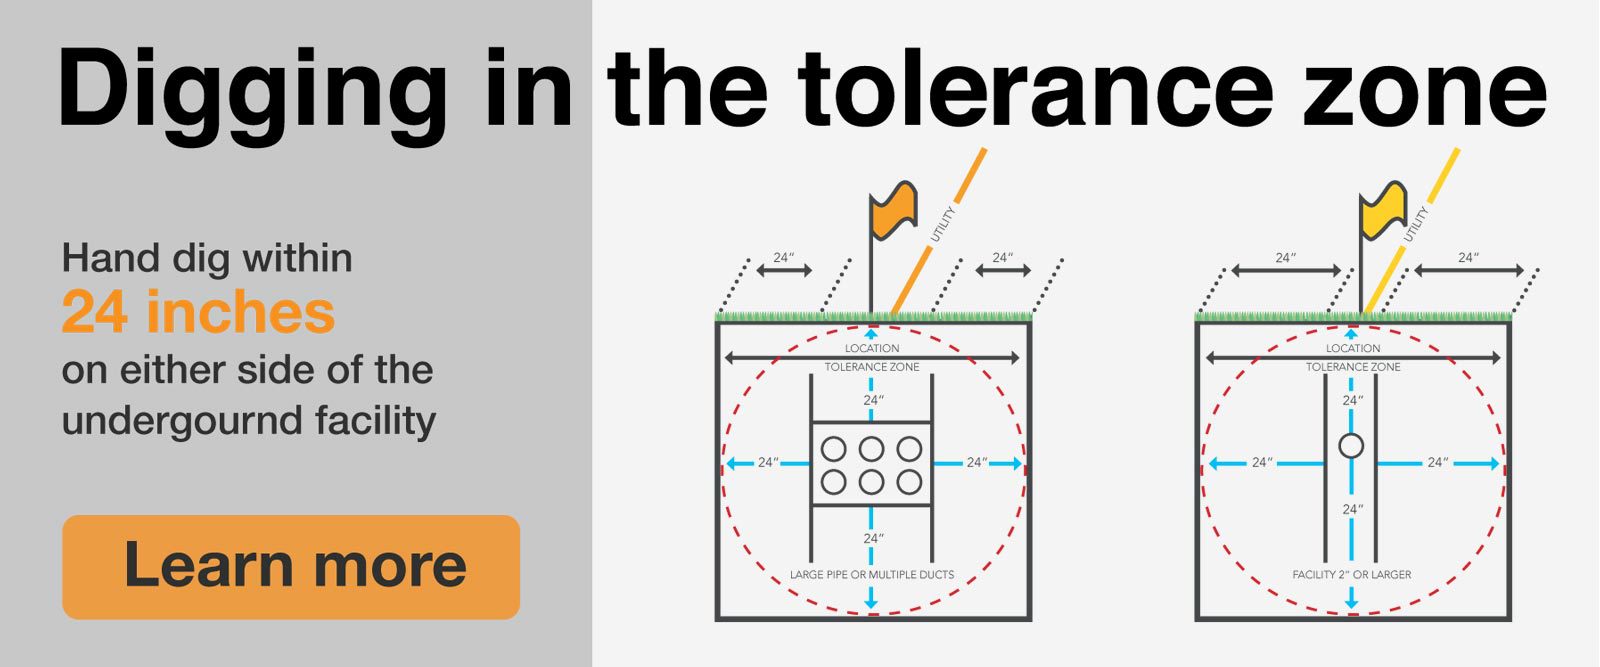 An image representing the Tolerance Zone